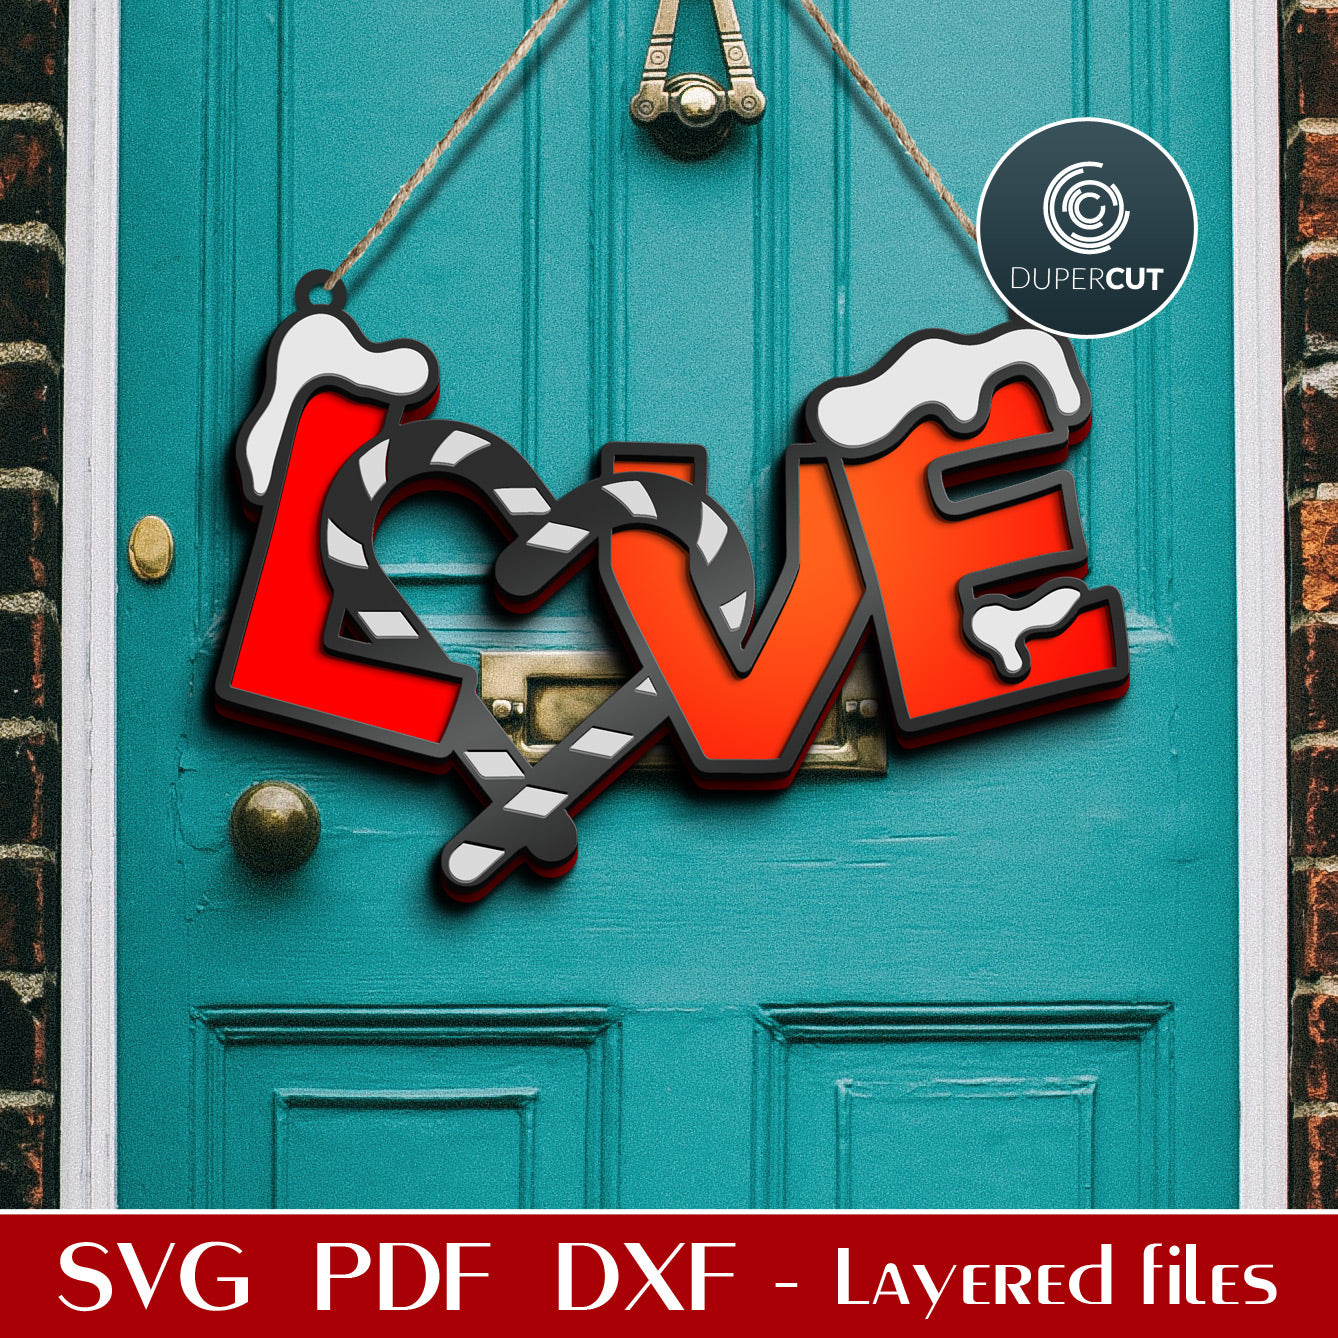 Love candy cane holiday door hanger - SVG DXF layered cutting files for Glowforge, Cricut, scroll saw, CNC plasma machines by DuperCut.com